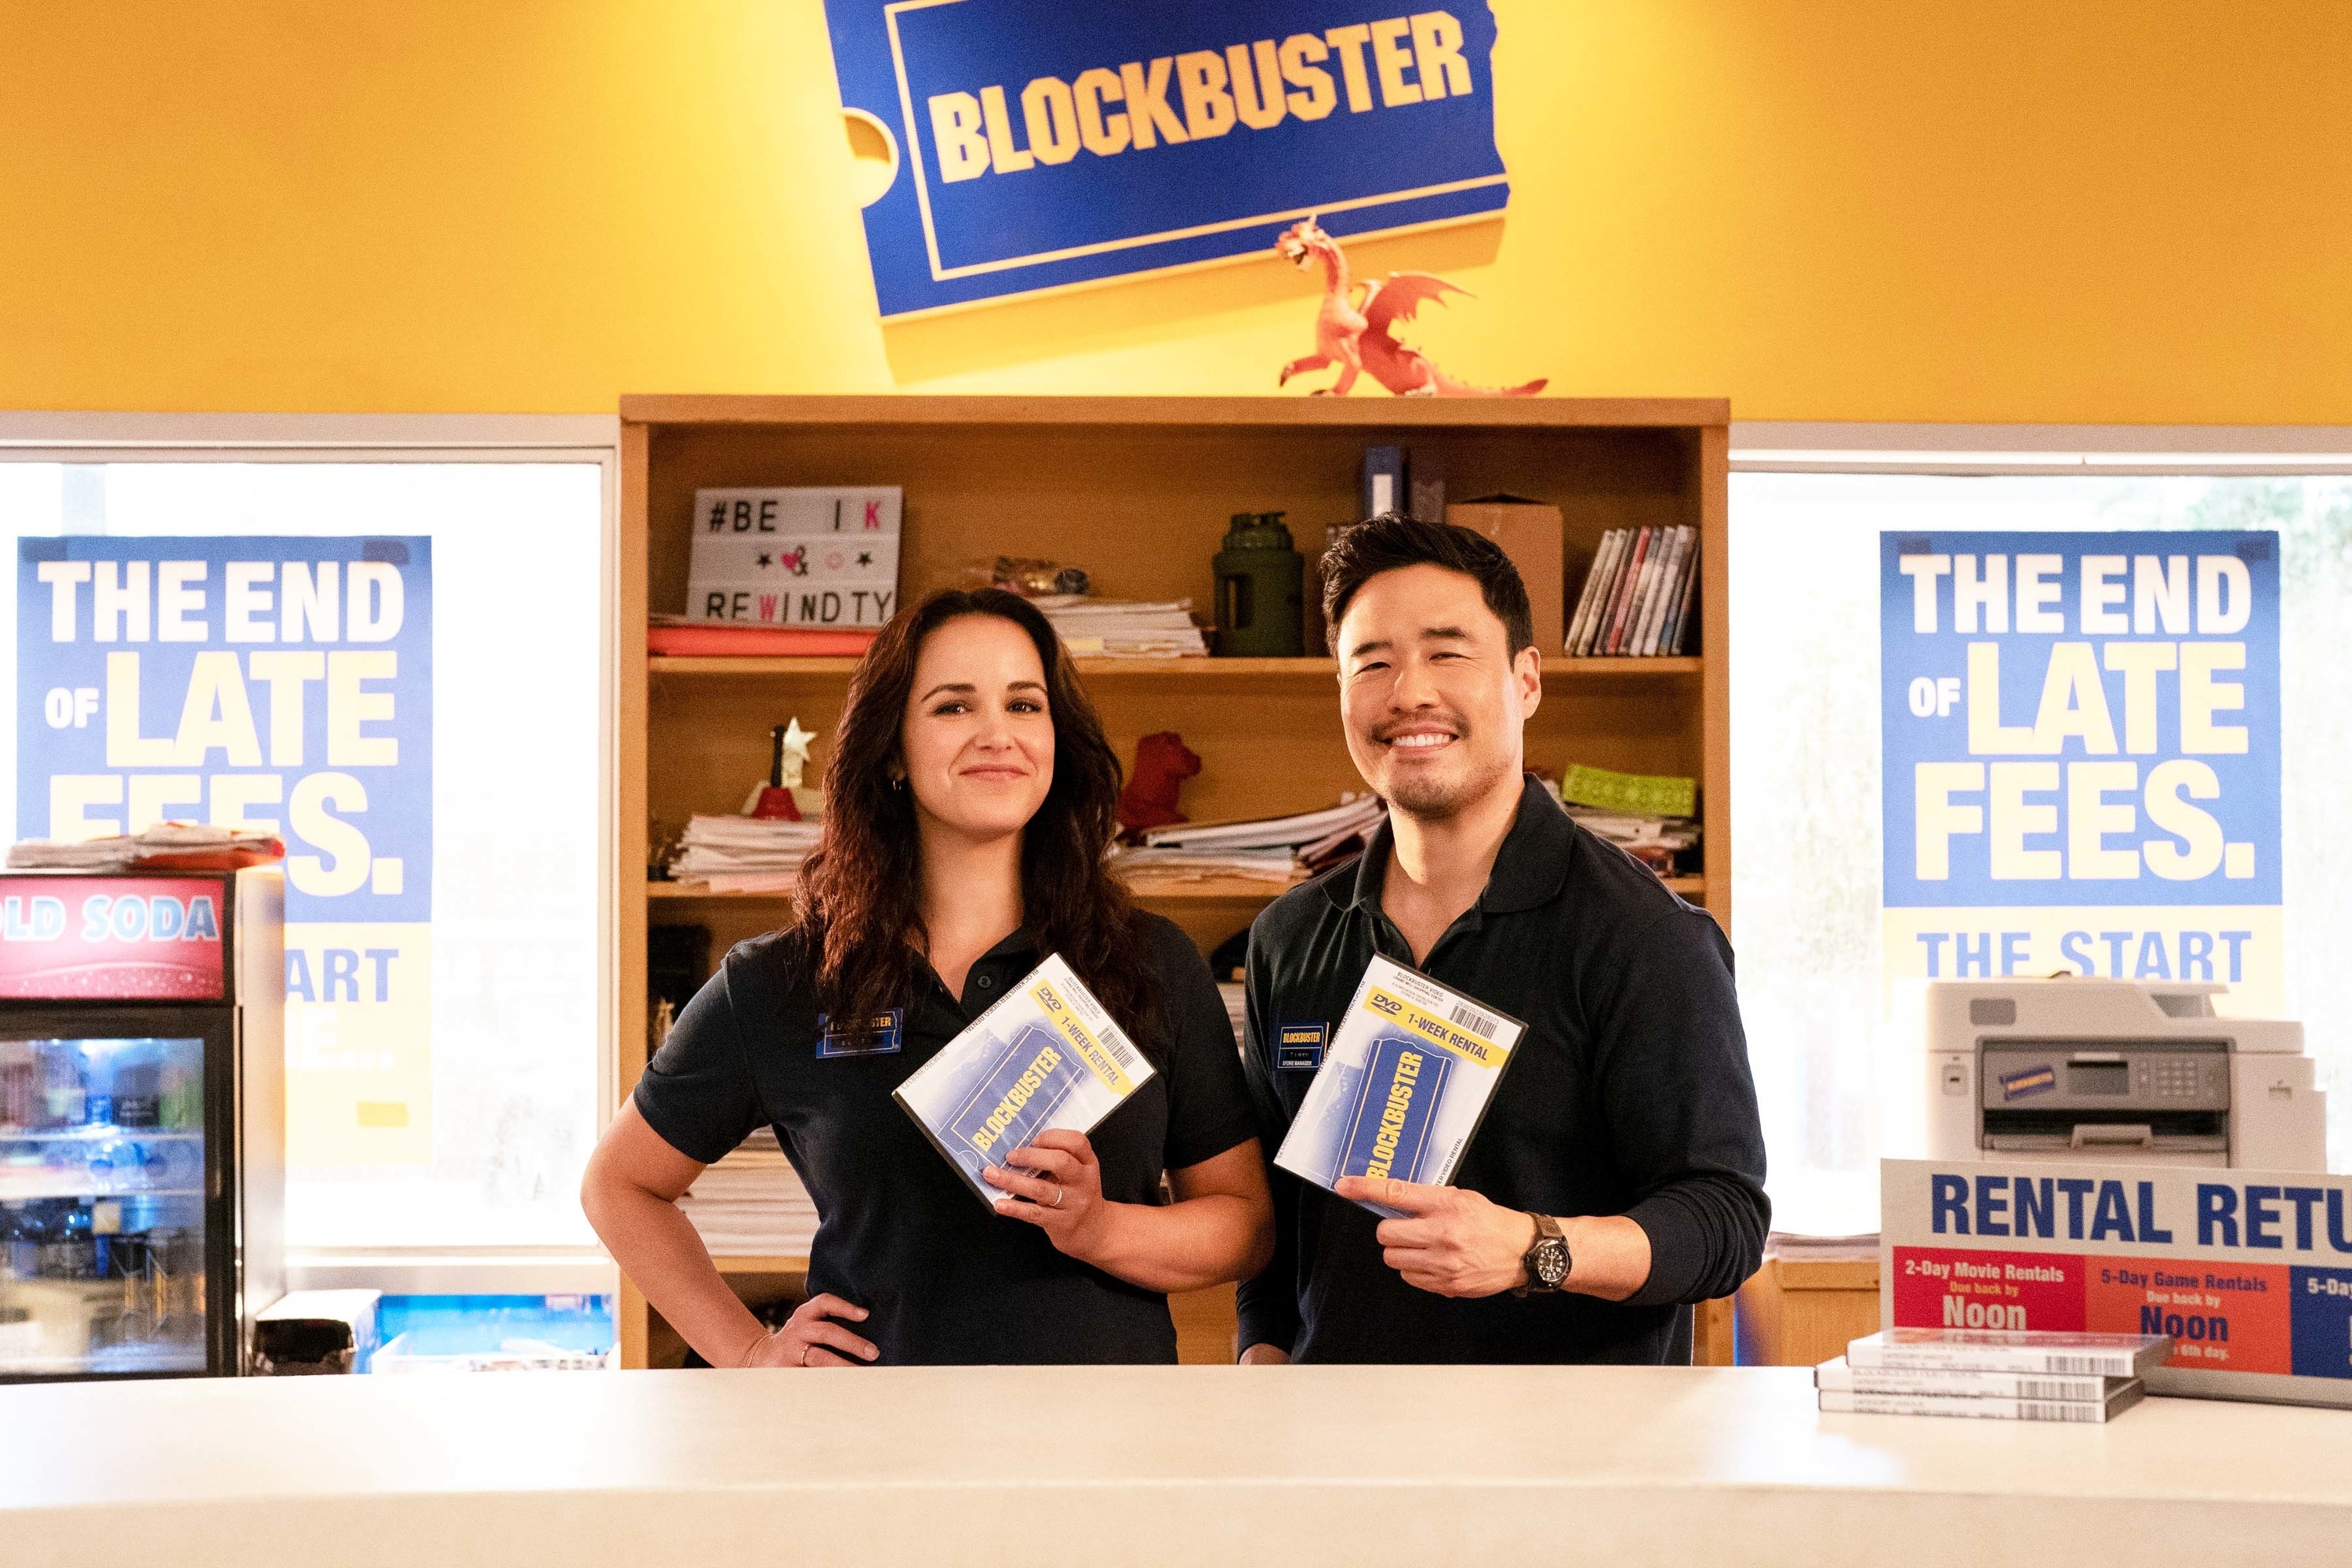 a man and a woman holding up rentals at a Blockbuster